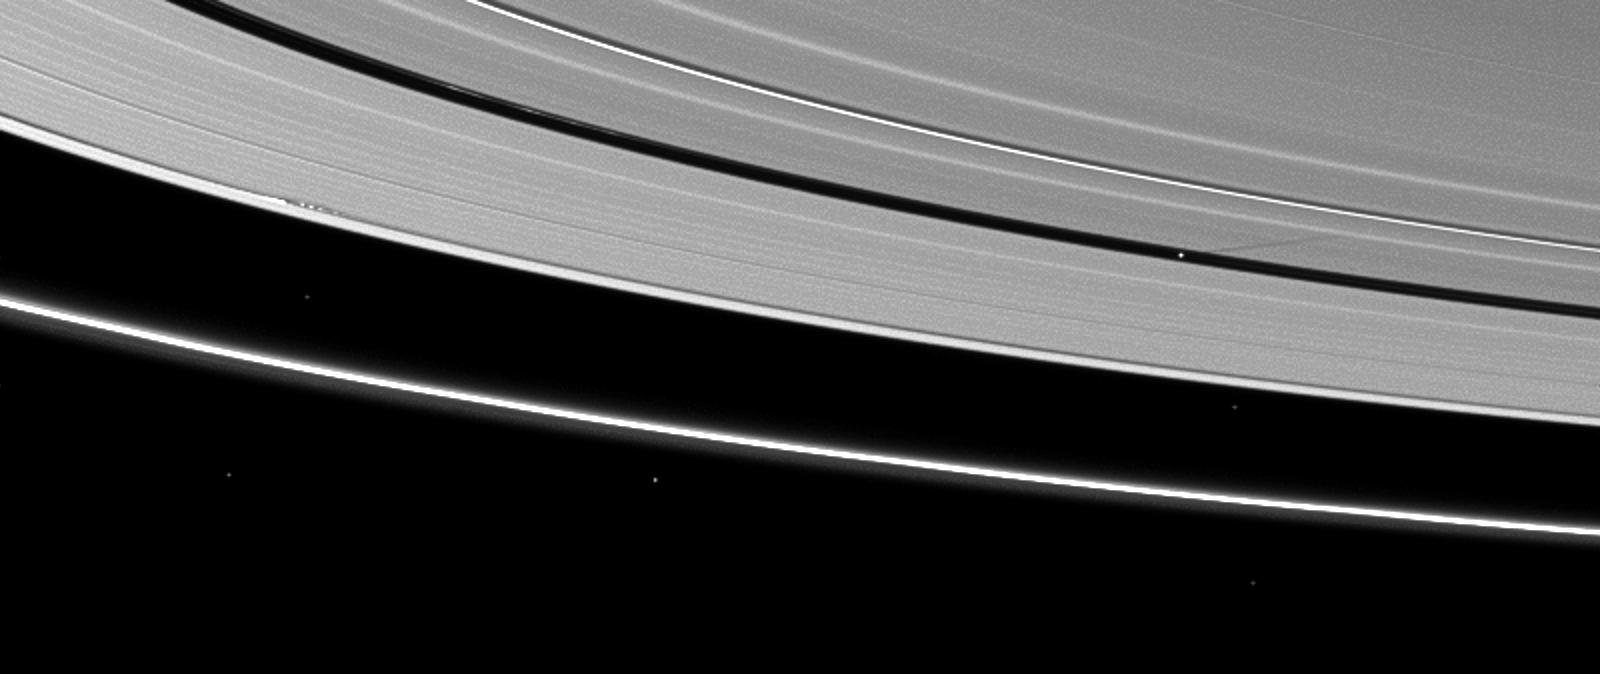 Moon shadows are cast on Saturn's A ring